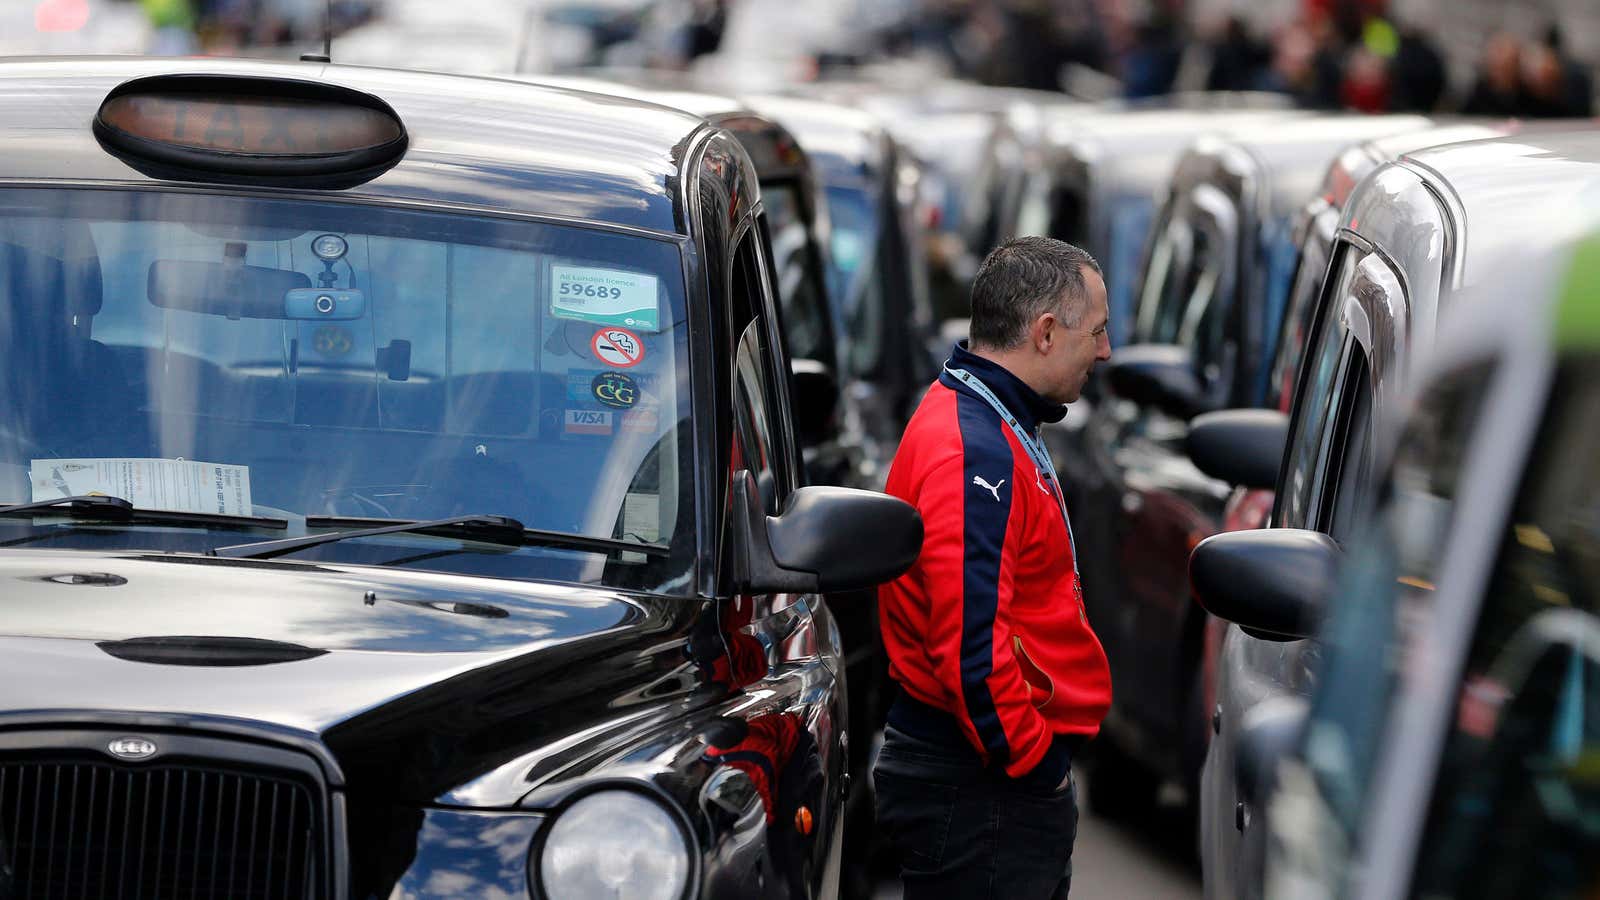 London taxi drivers protesting against ride-hailing services.